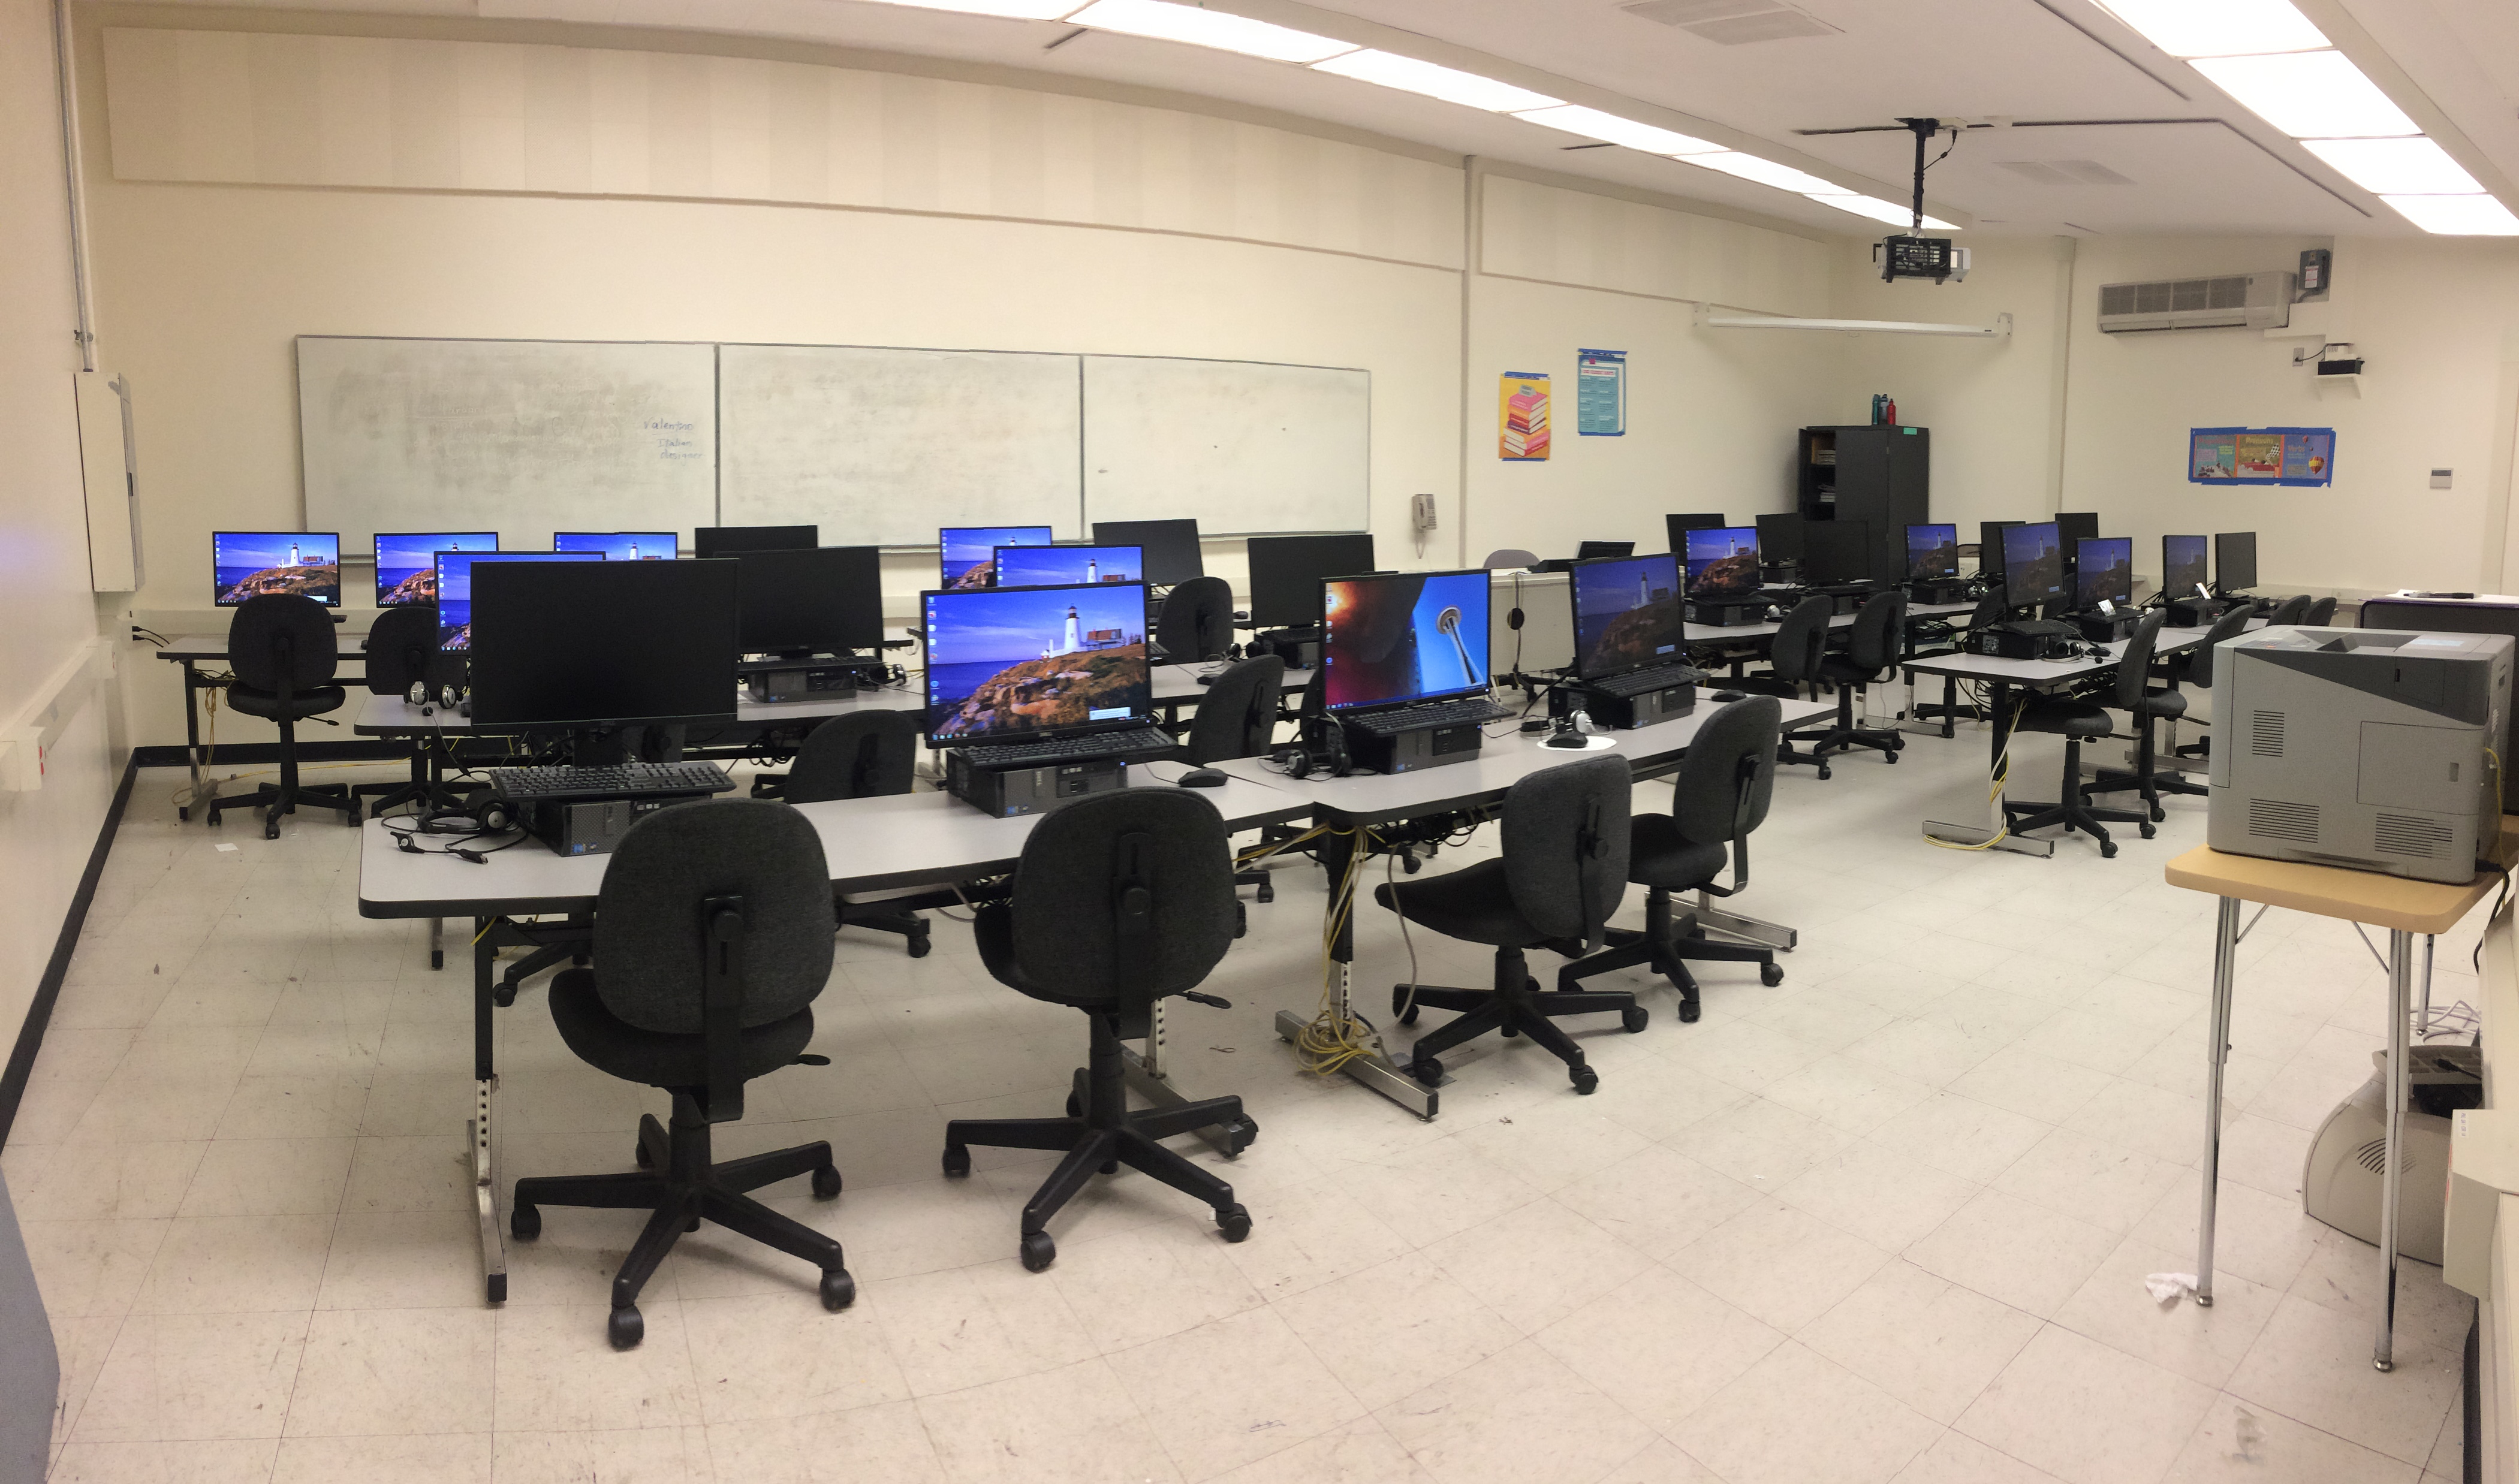 Computers lined with chairs in the lab